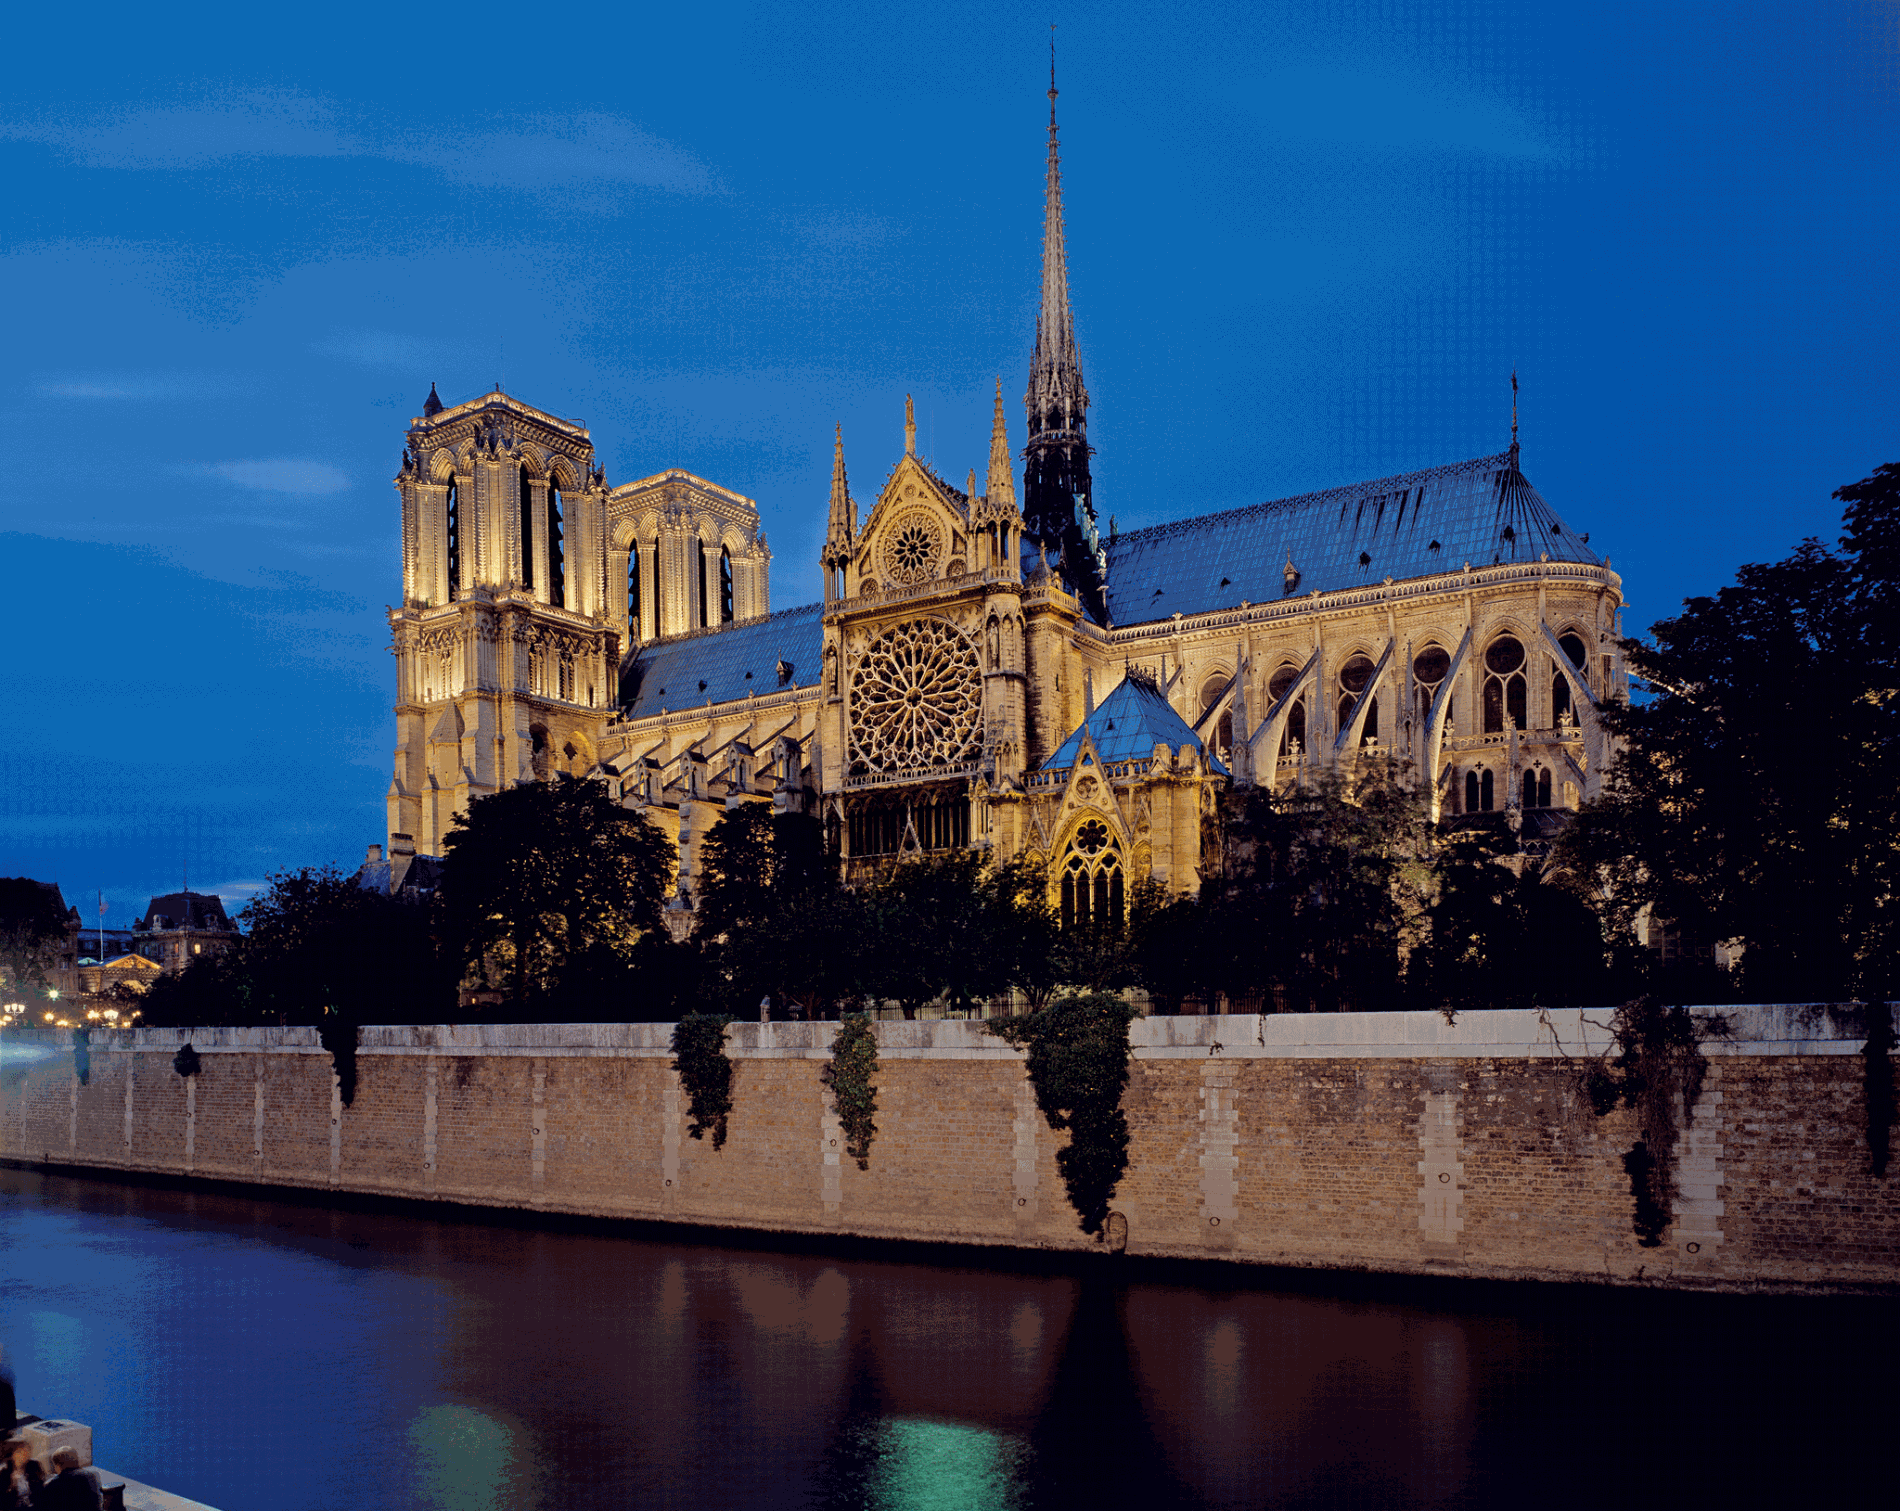 World #1 – FRANCE: Developing Story – Fire guts Paris’ Notre Dame Cathedral